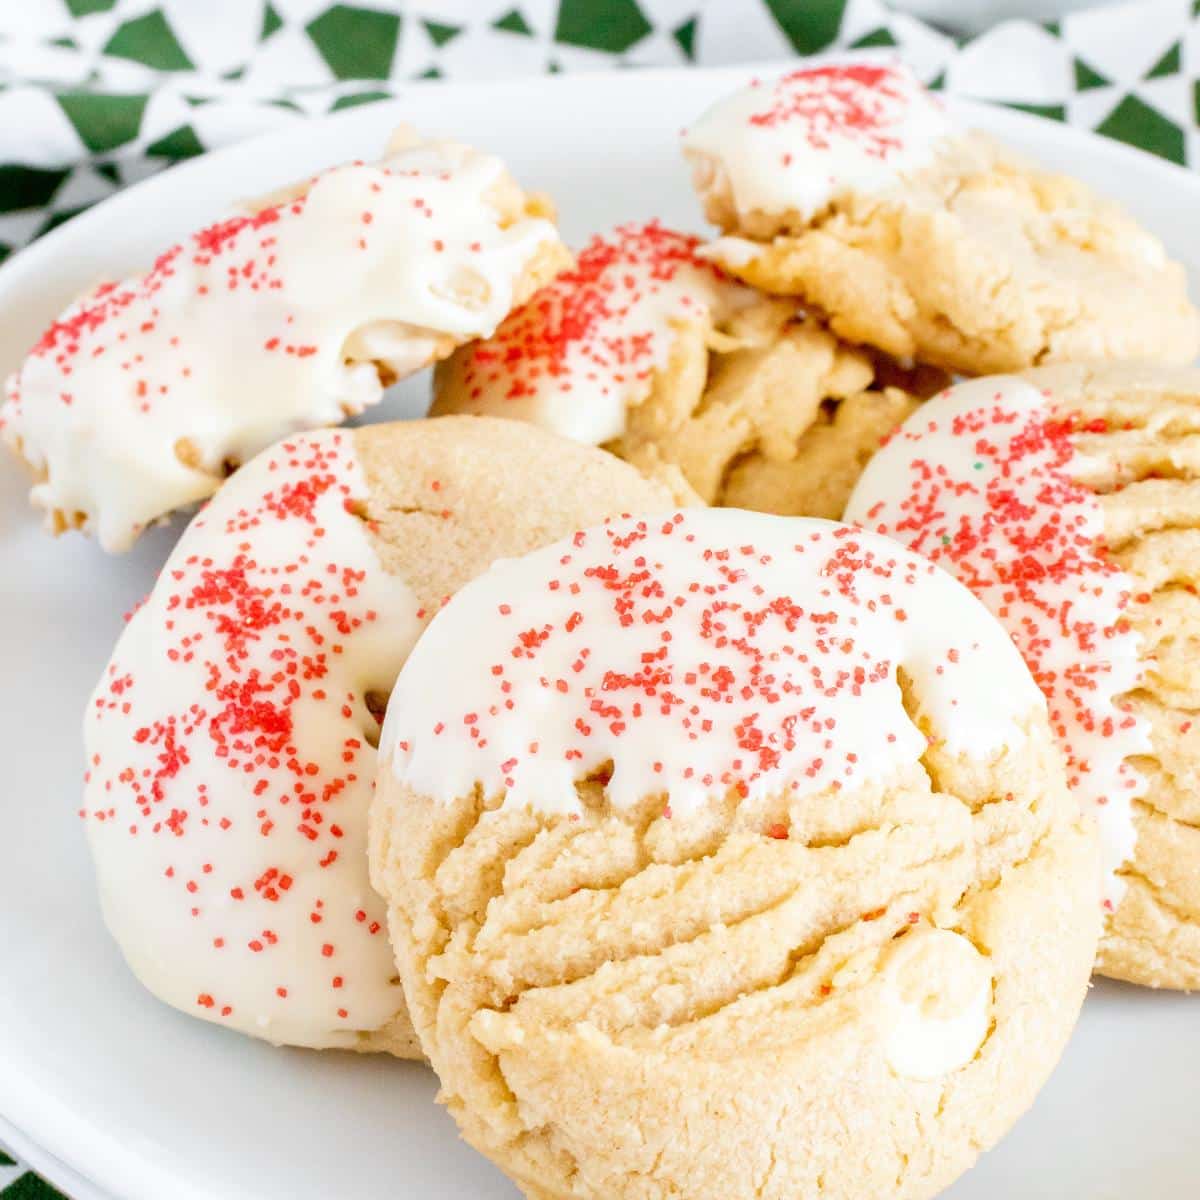 A white plate filled with white chocolate peanut butter cookies decorated with red sprinkles.